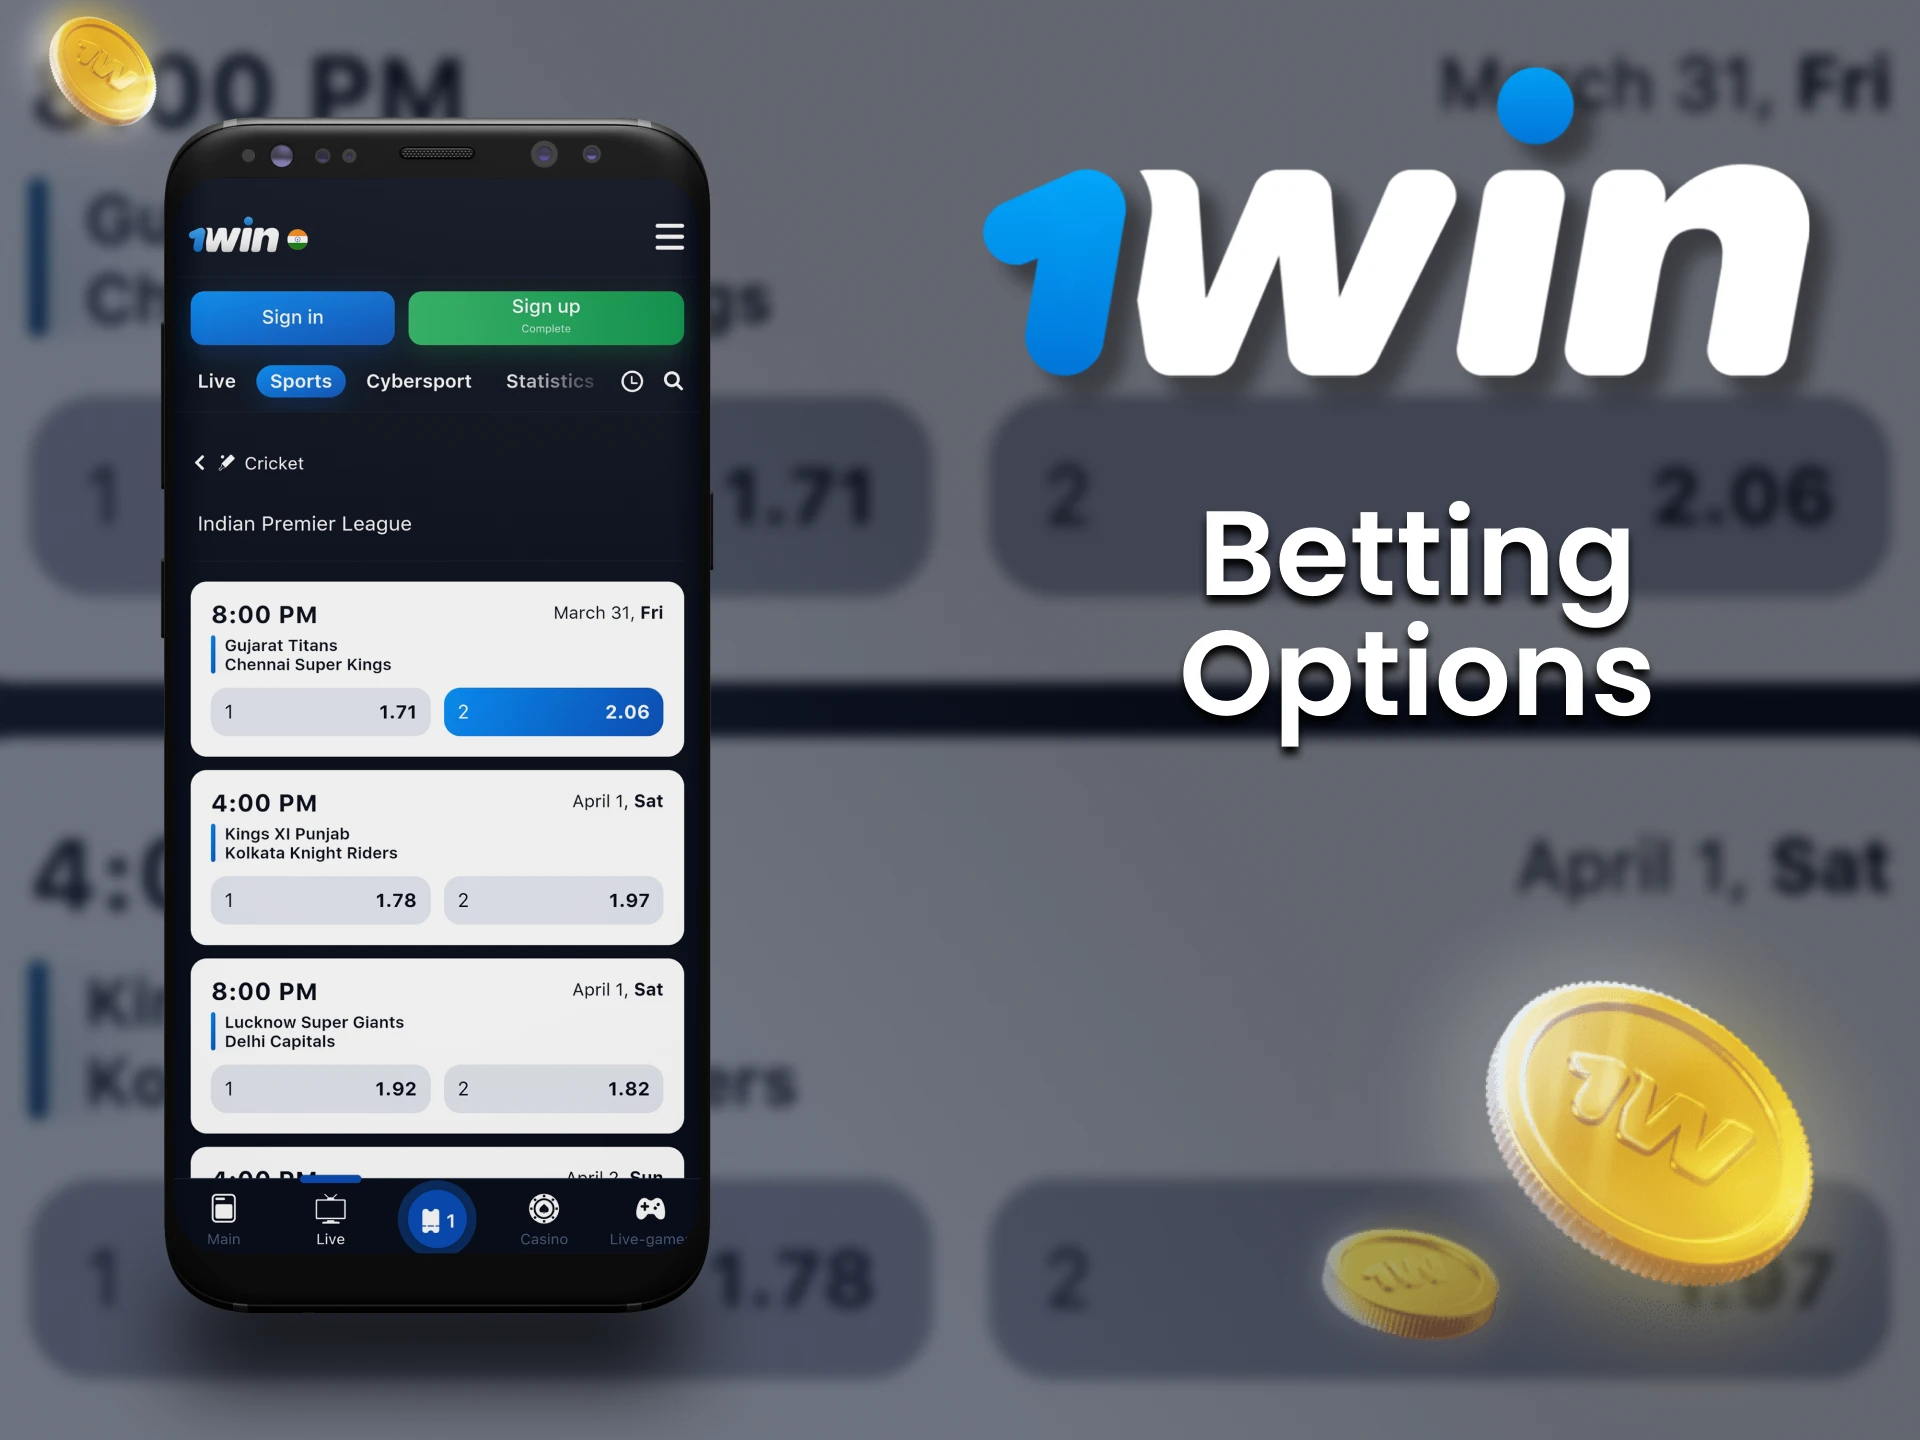 Betting options for sports in the 1win app.